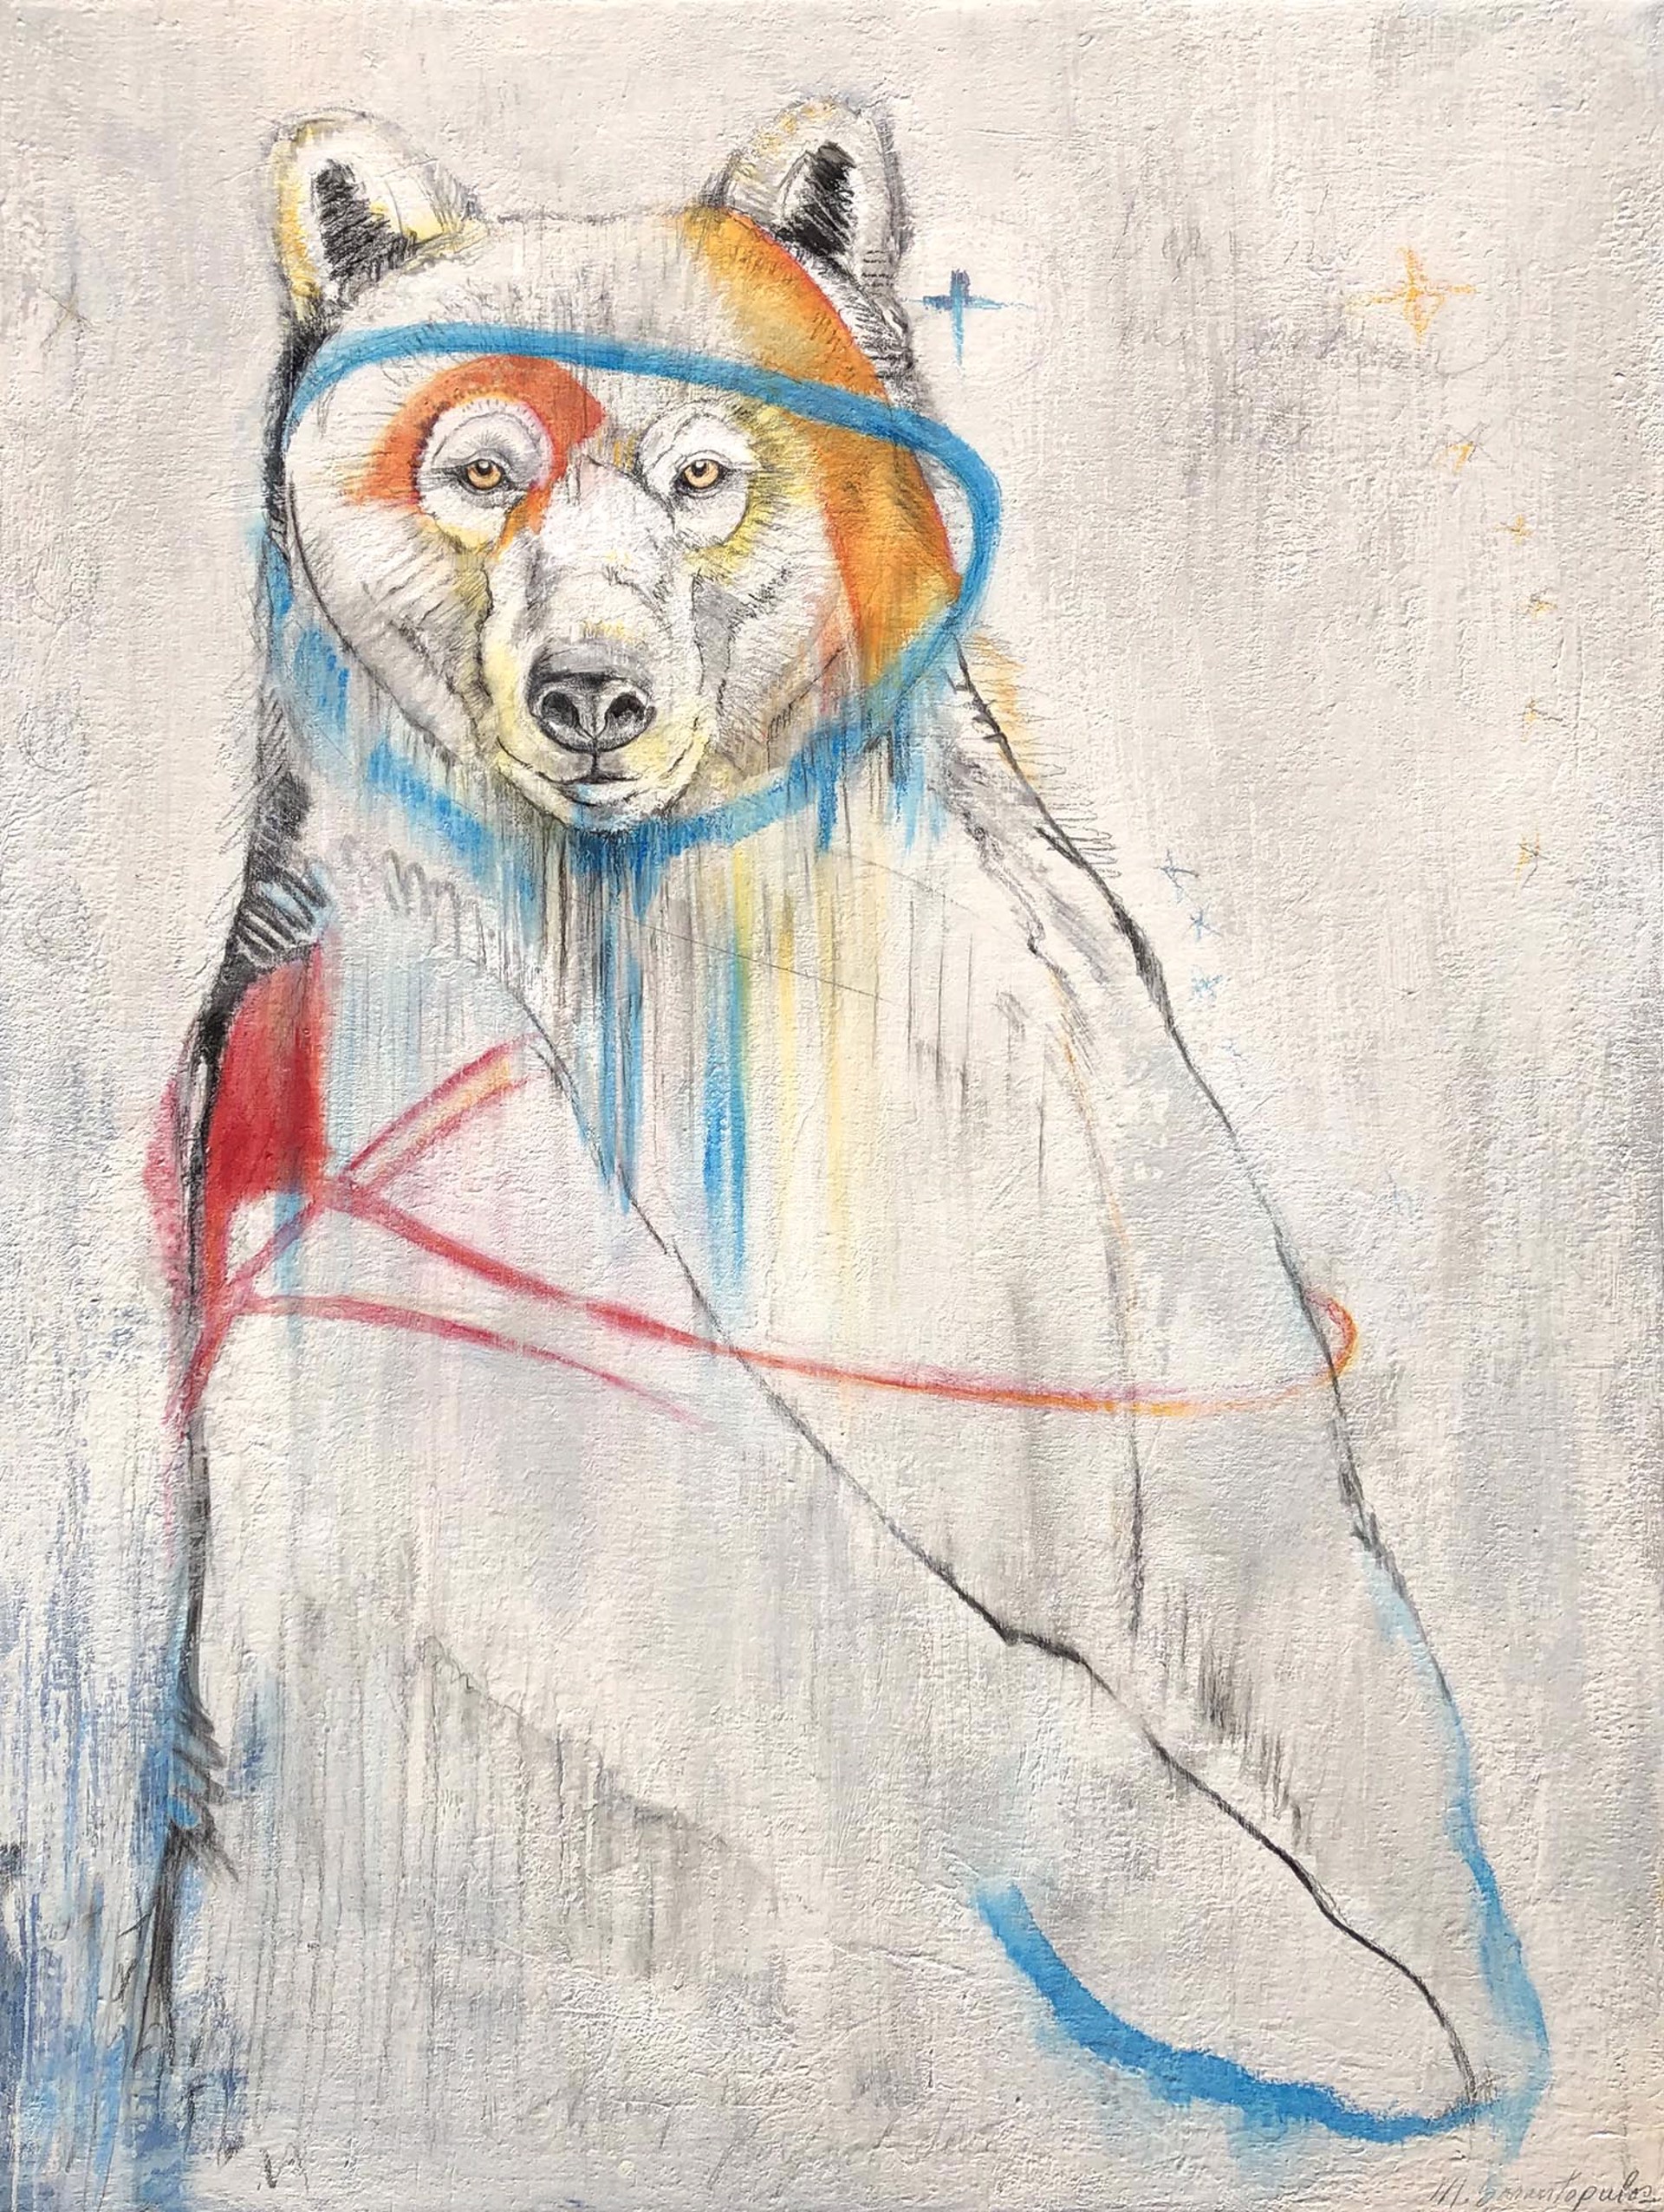 Original Mixed Media Painting Featuring A Grizzly Bear Sketched Over Abstract Gray Background With Colorful Doodle Details